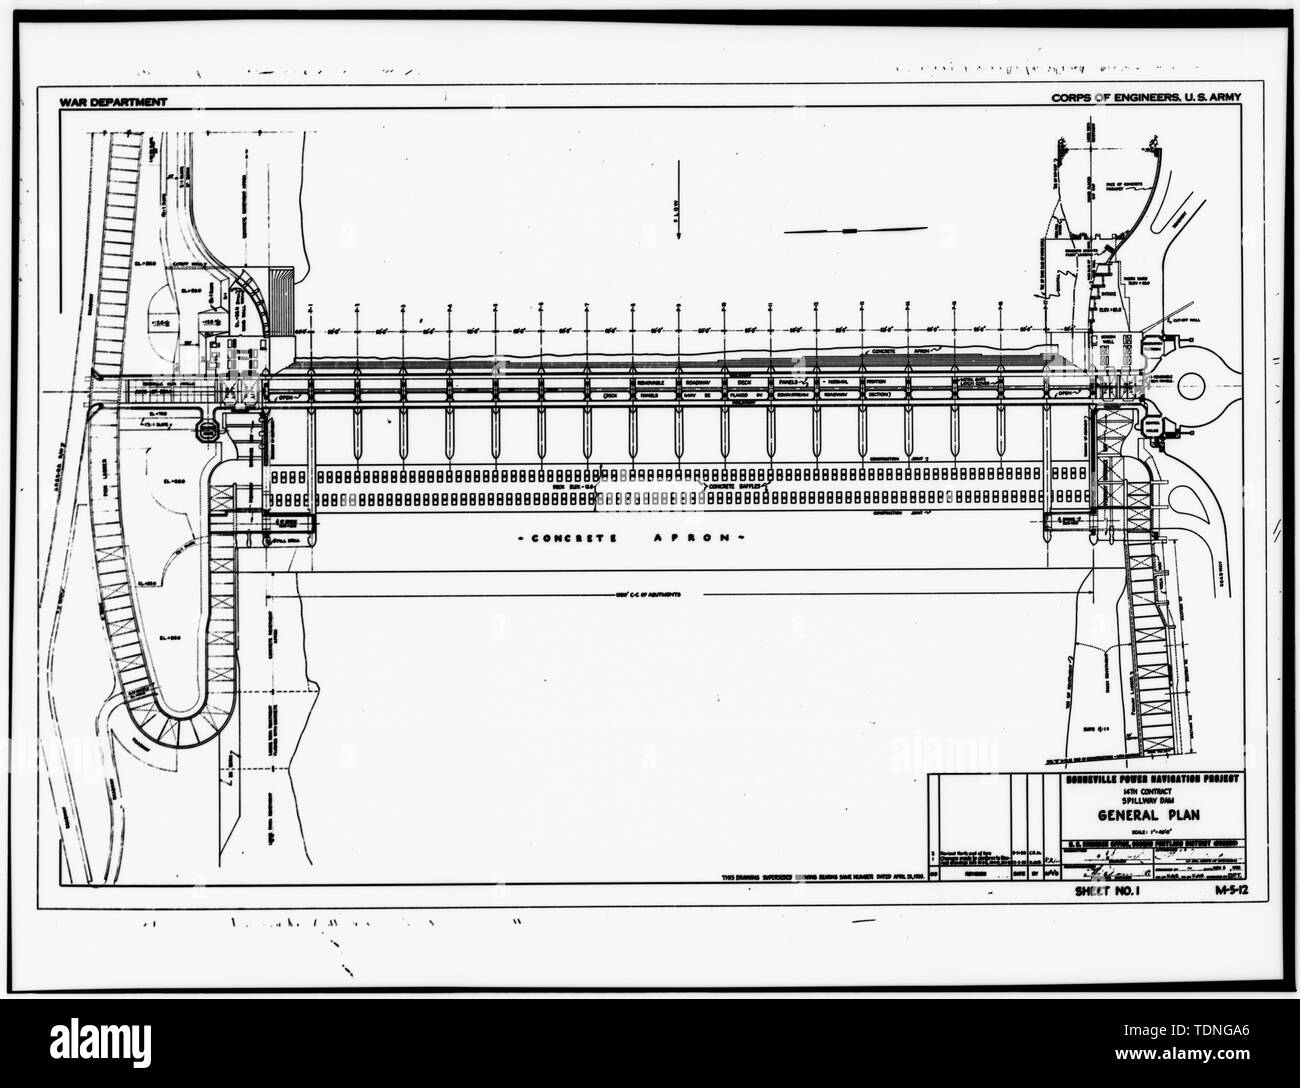 Photocopy of original construction drawing, 5 November 1935. (Original print in the possession of U.S. Army Corps of Engineers, Portland District, Portland, OR.) (M-5-12, Sheet No. 1) SPILLWAY DAM GENERAL PLAN. - Bonneville Project, Bonneville Dam, Columbia River, Bonneville, Multnomah County, OR Stock Photo